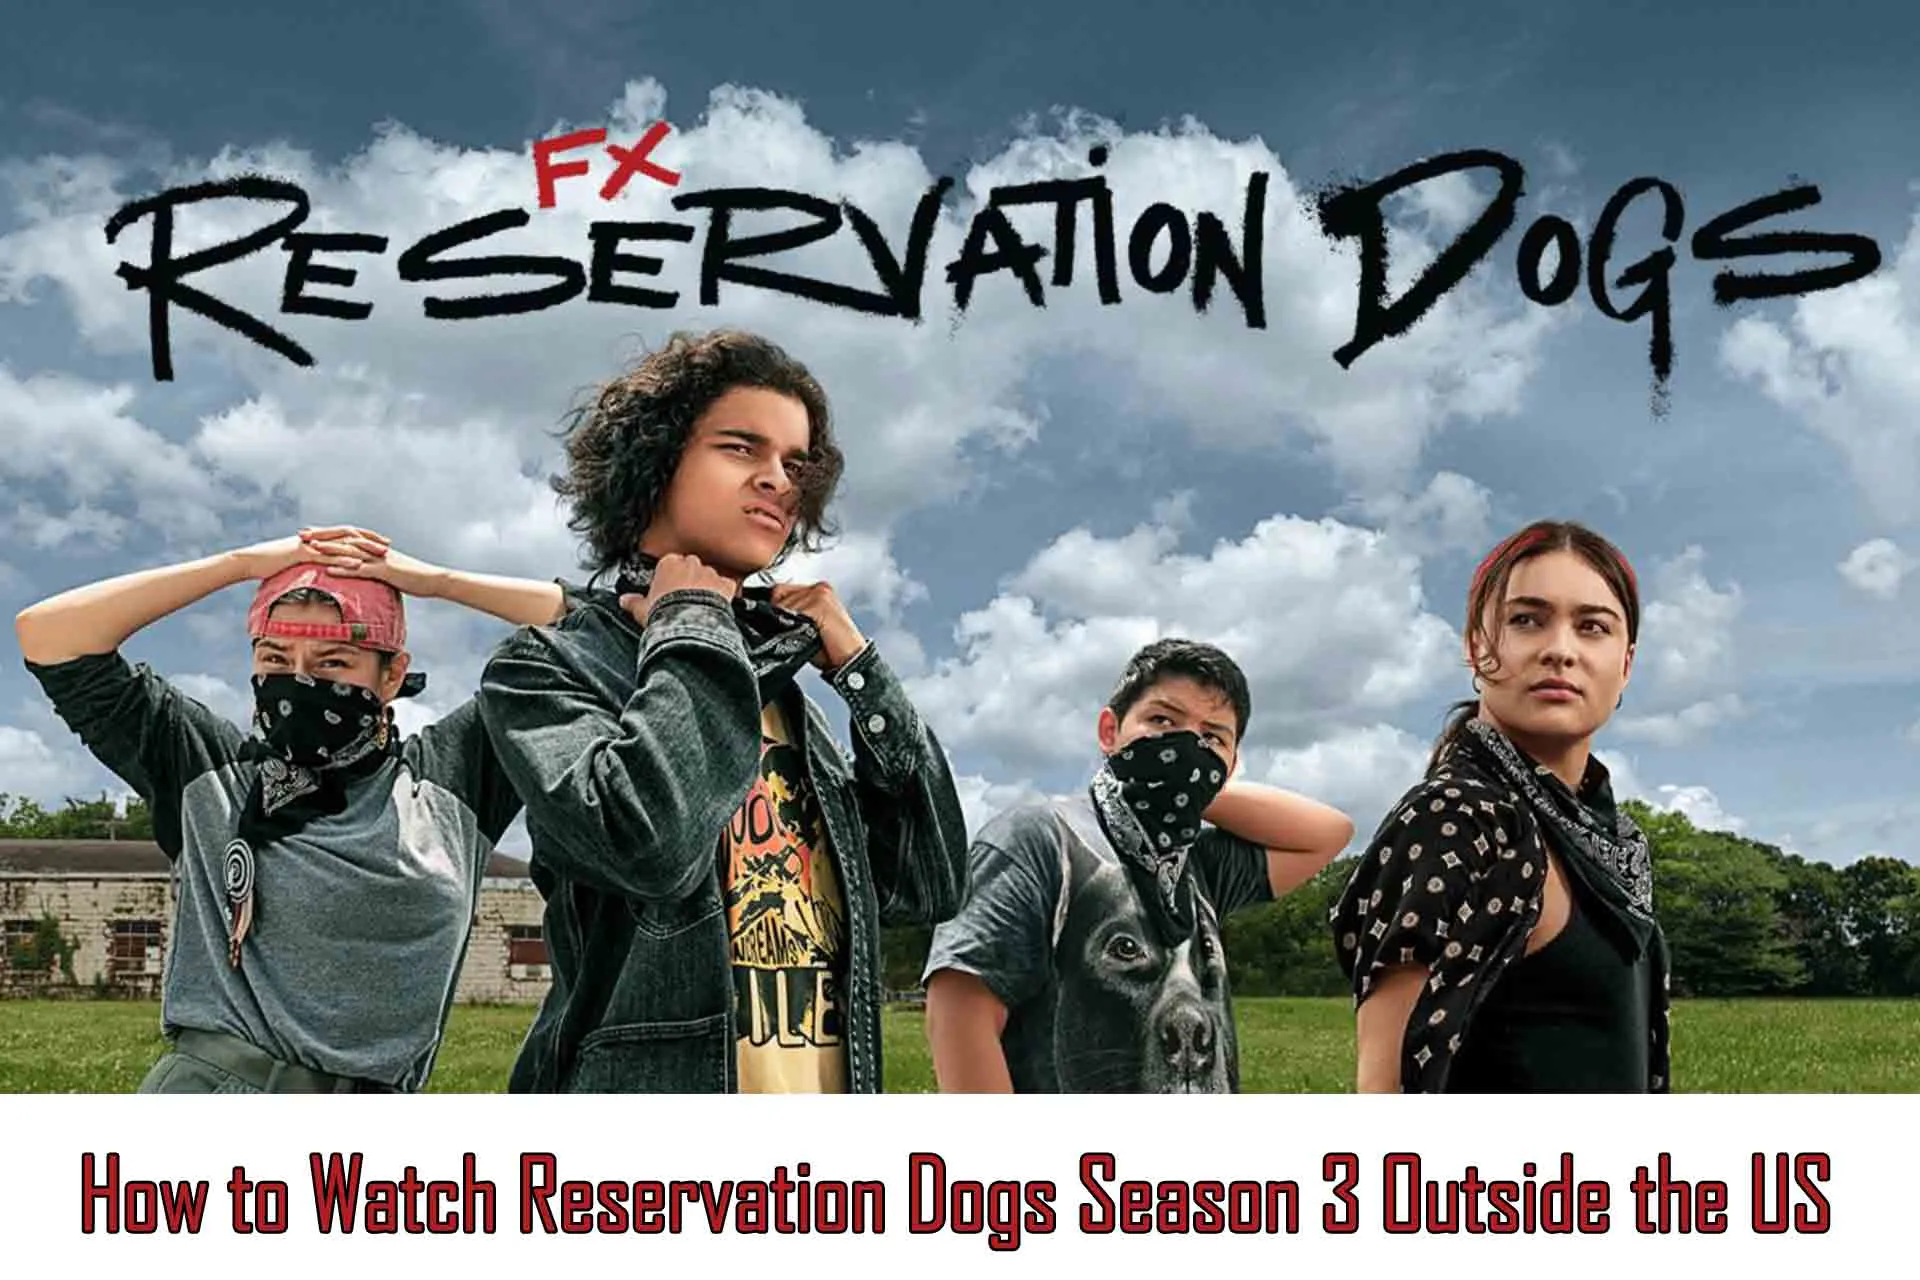 watch Reservation Dogs Season 3 abroad